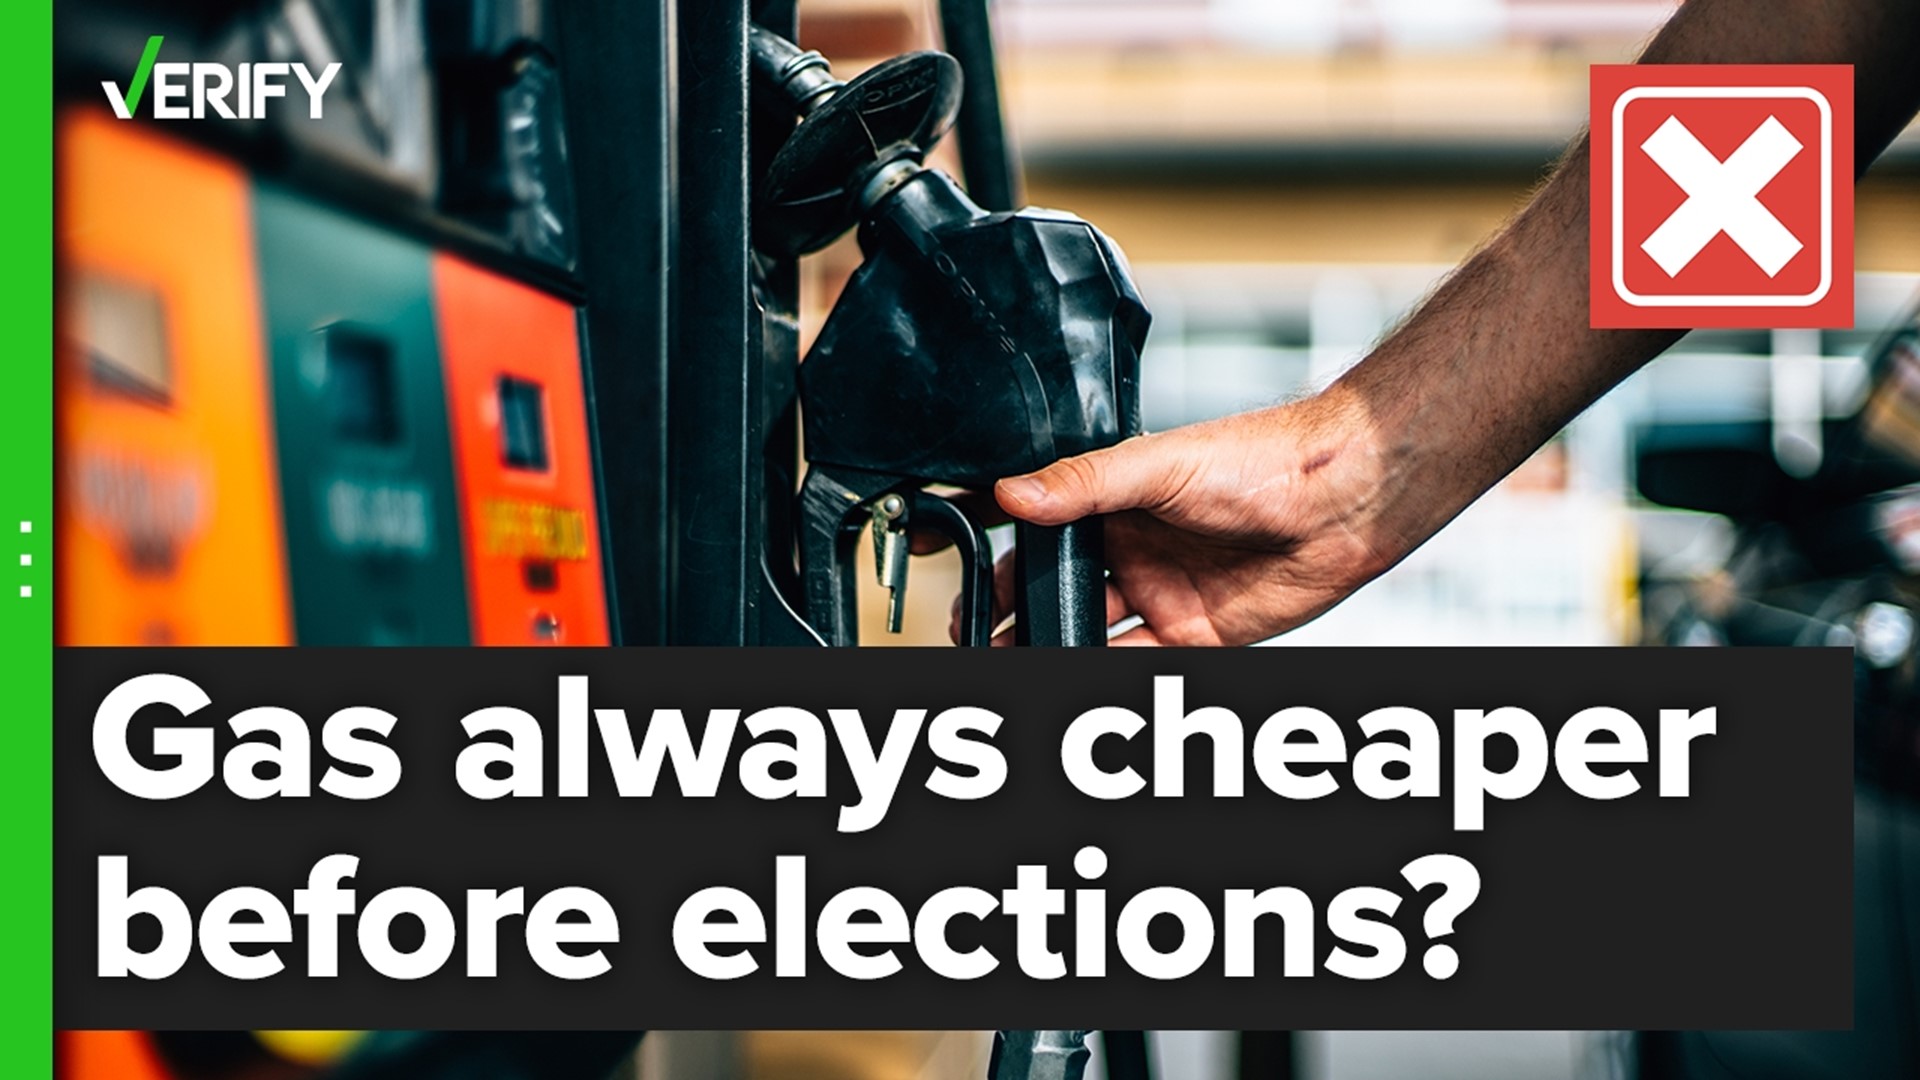 Some have speculated gas prices tend to drop before big elections like the upcoming midterms, but historical data doesn’t support that claim.